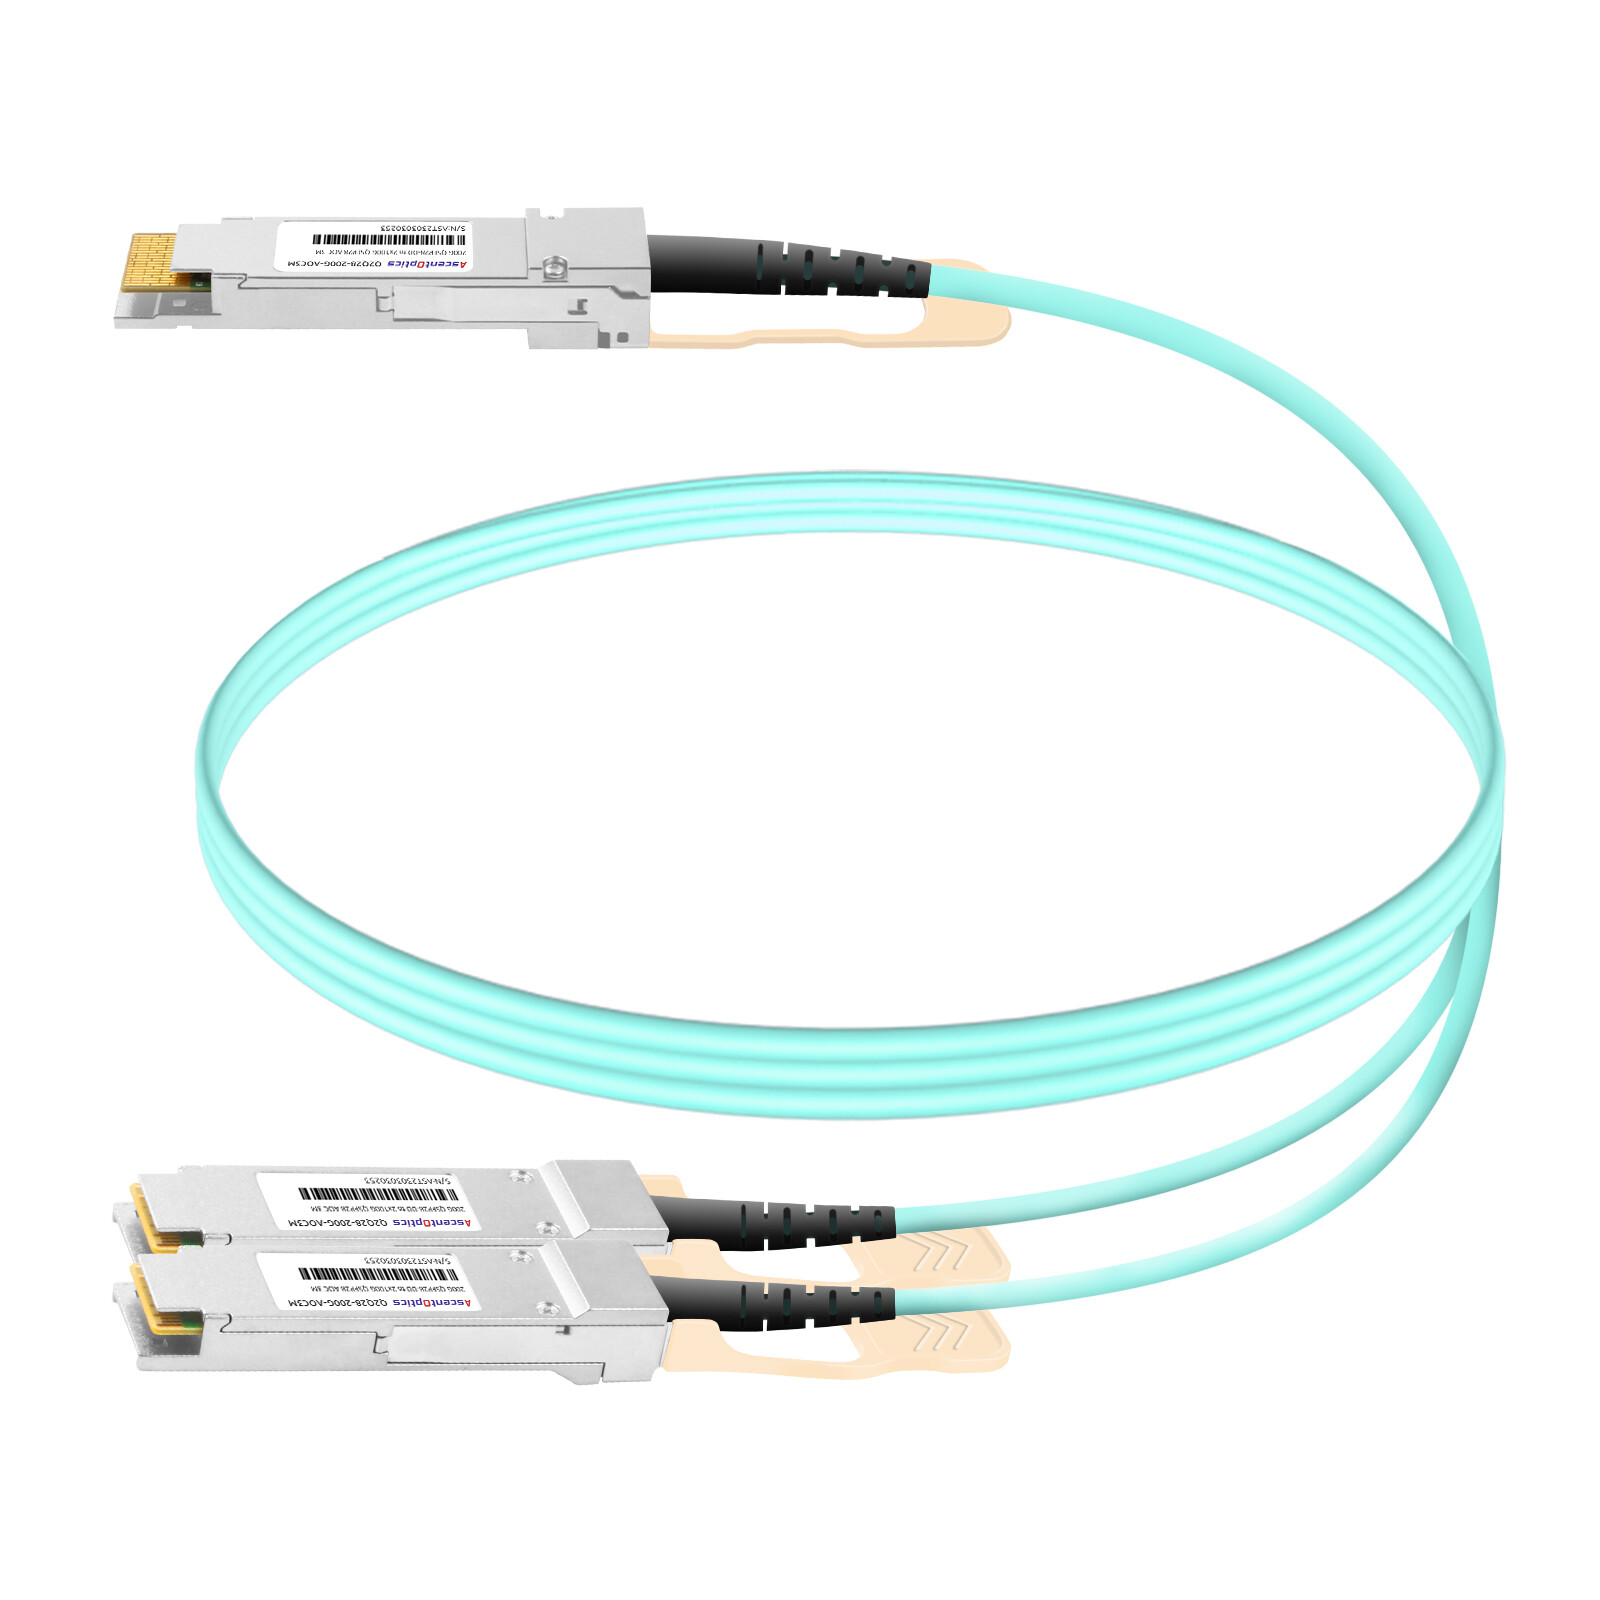 200G QSFP28-DD to 2x 100G QSFP28 Breakout AOC Cable,3 Meters